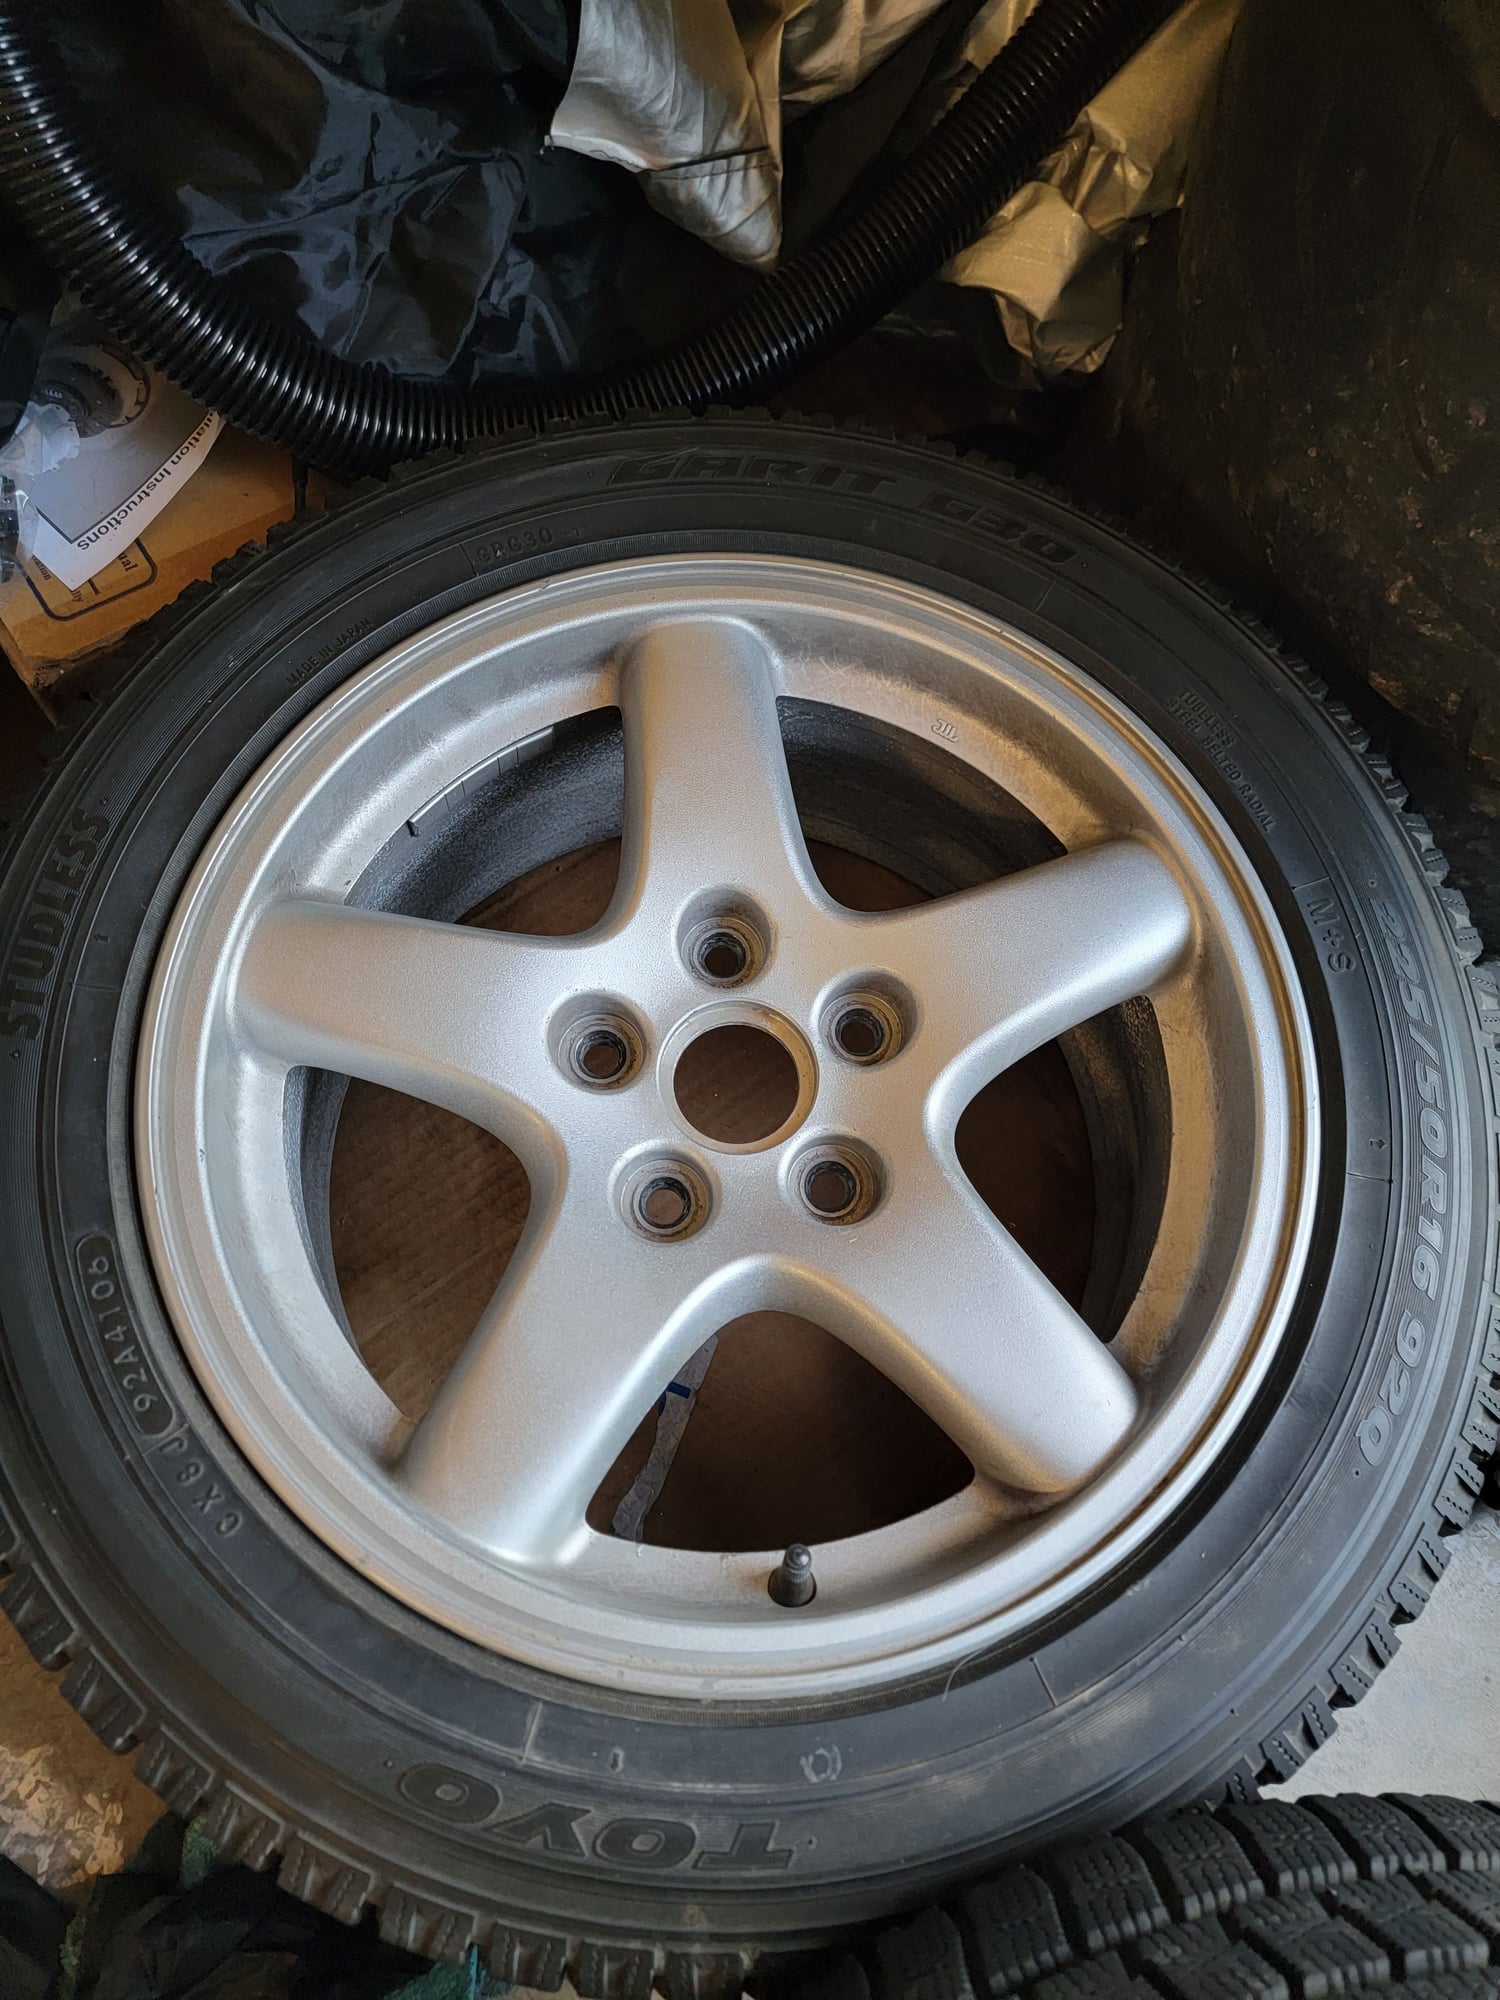 1994 Mazda RX-7 - Rx7 series 8 wheels - Wheels and Tires/Axles - $600 - West Harrison, IN 47060, United States